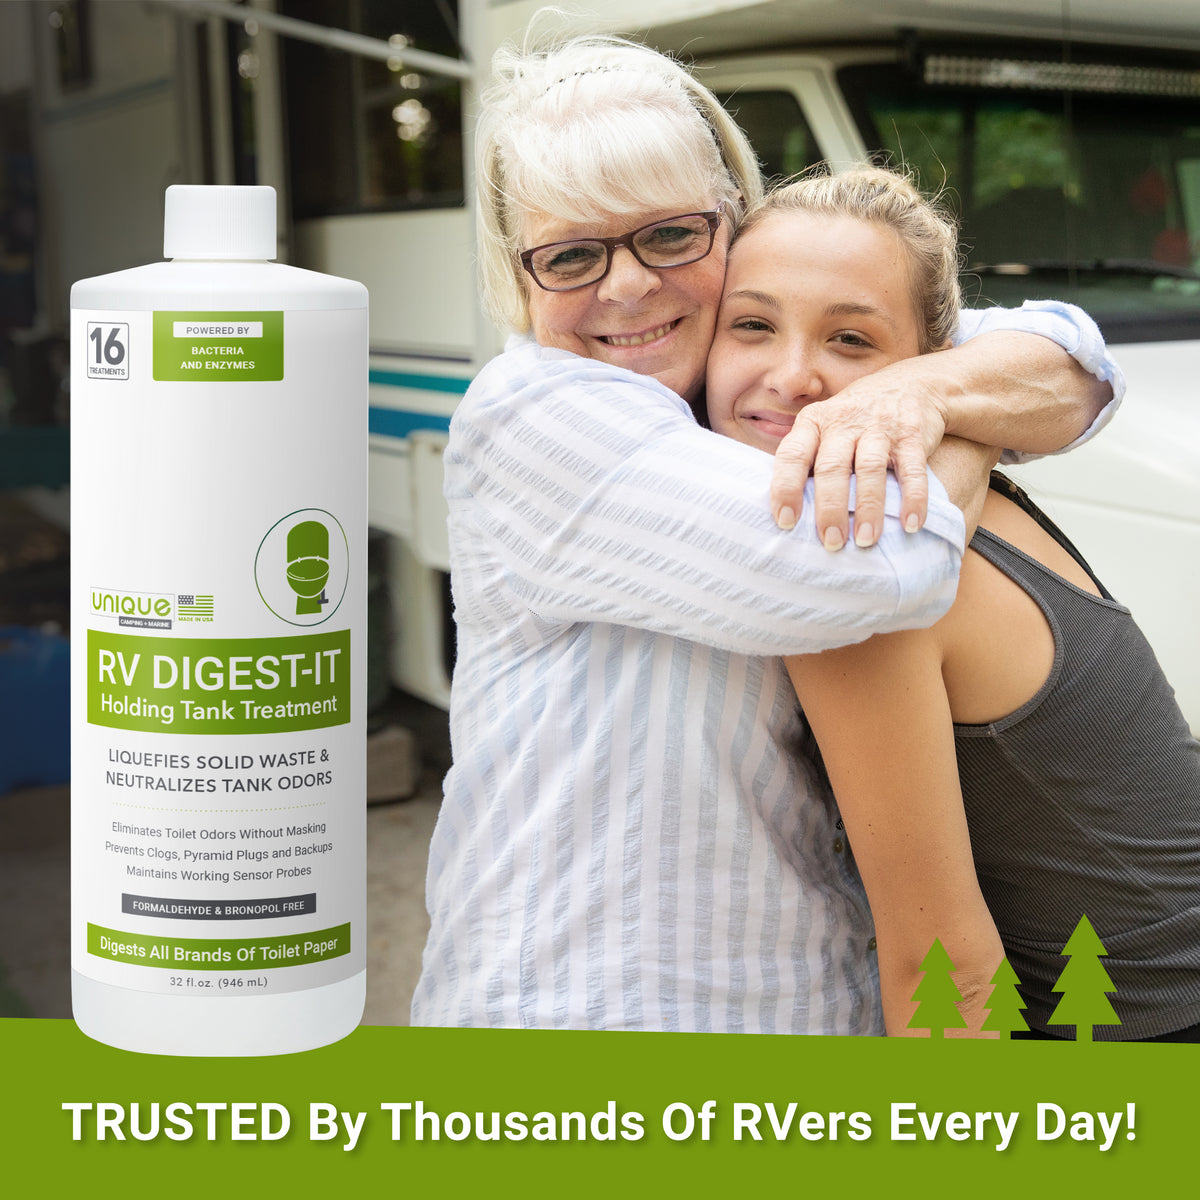 Unique RV Digest-It Holding Tank Treatment is trusted by thousands of RVers everyday.